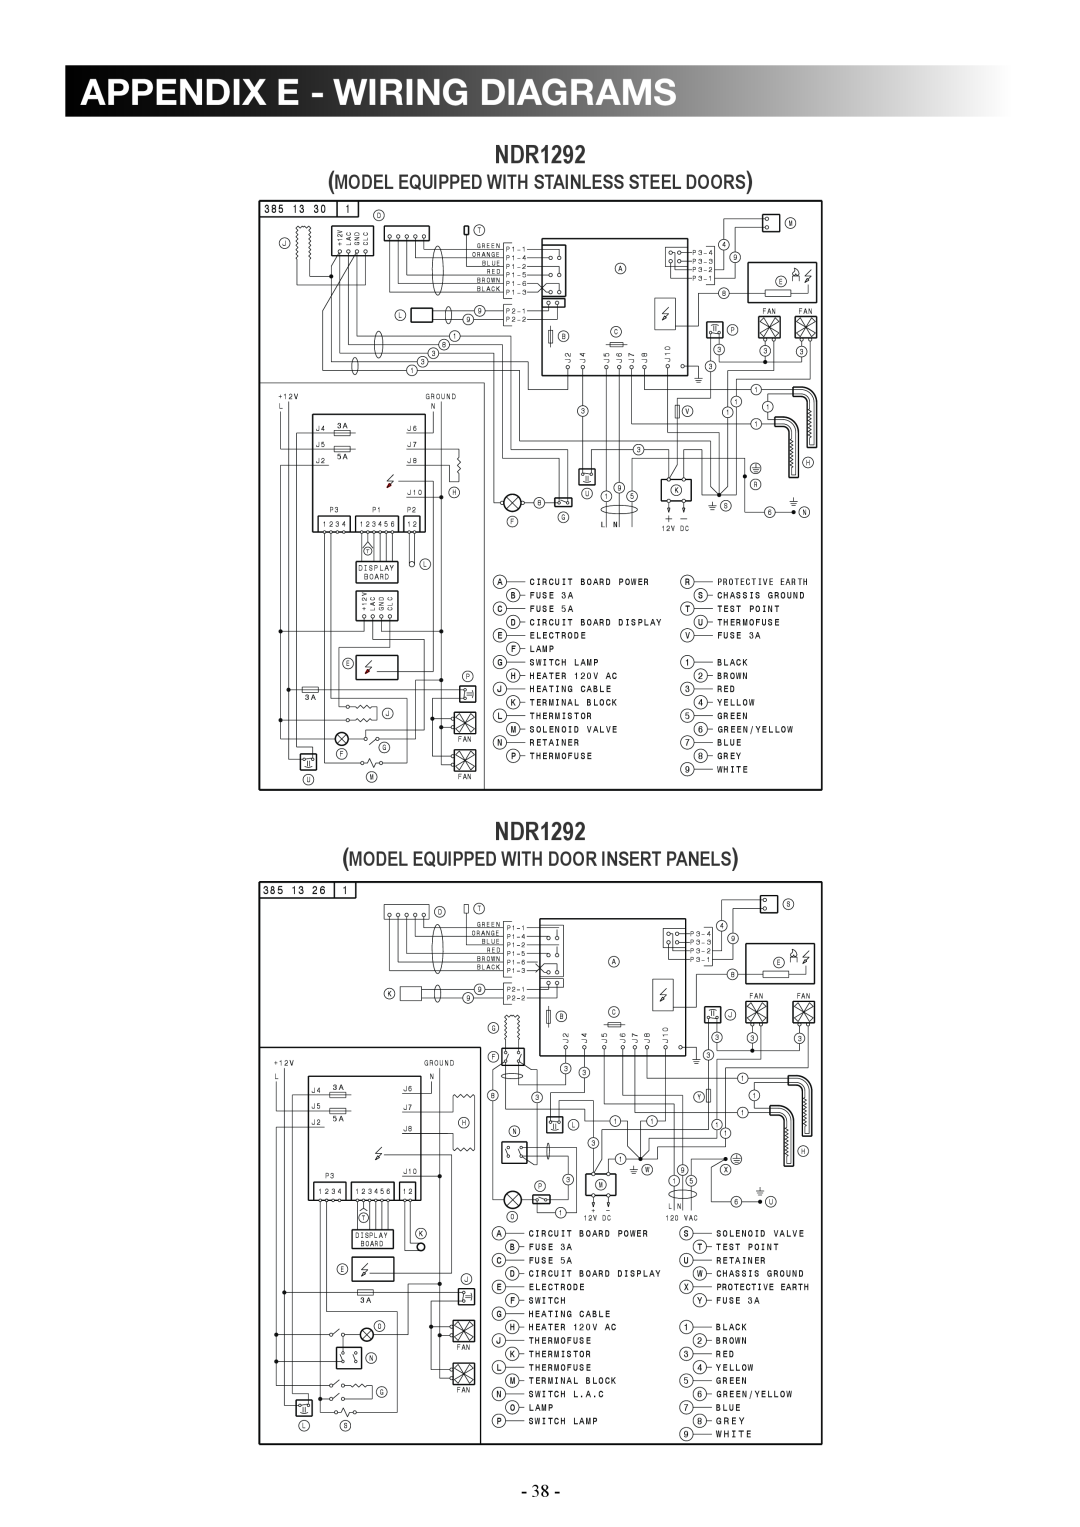 Dometic DM2862 manual appendix e - wiring diagrams, NDR1292, model equipped with stainless steel doors 